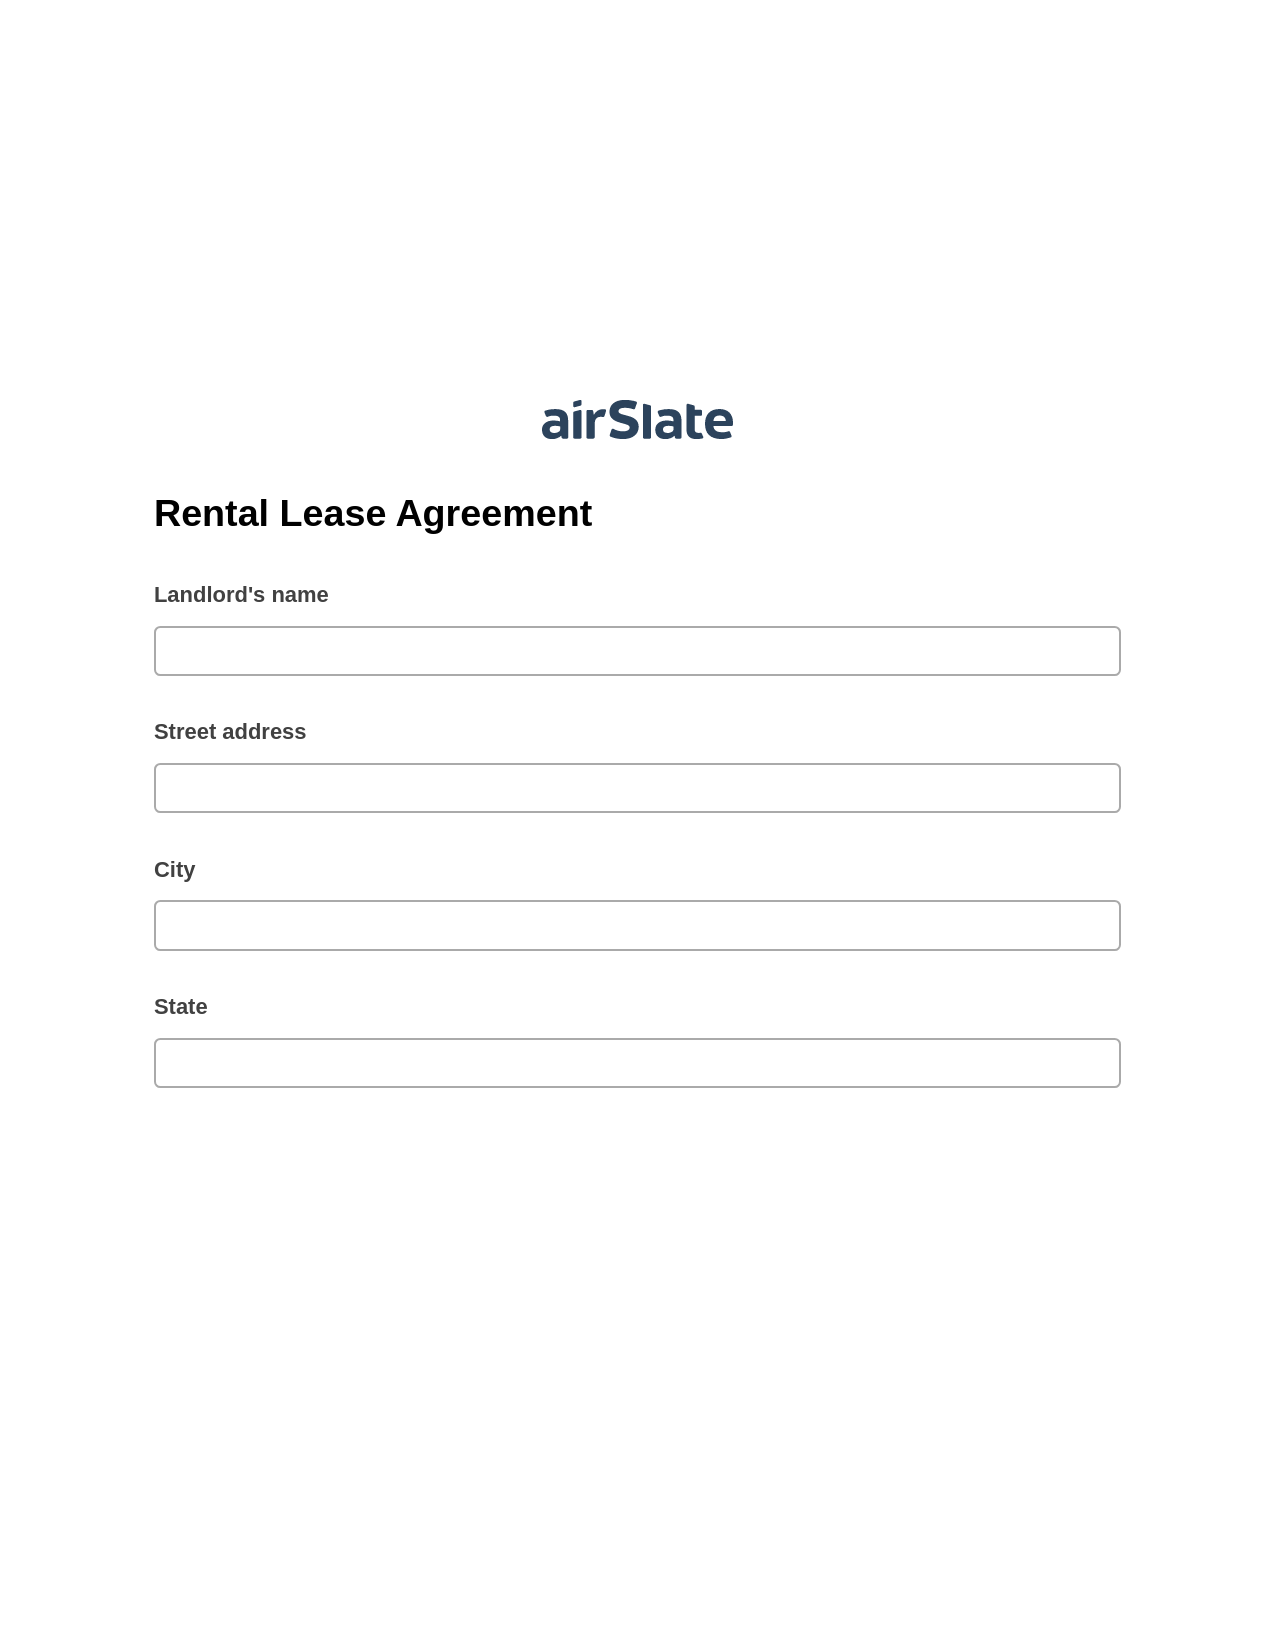 Rental Lease Agreement Pre-fill from Excel Spreadsheet Dropdown Options Bot, Send a Slate to Salesforce Contact Bot, Post-finish Document Bot